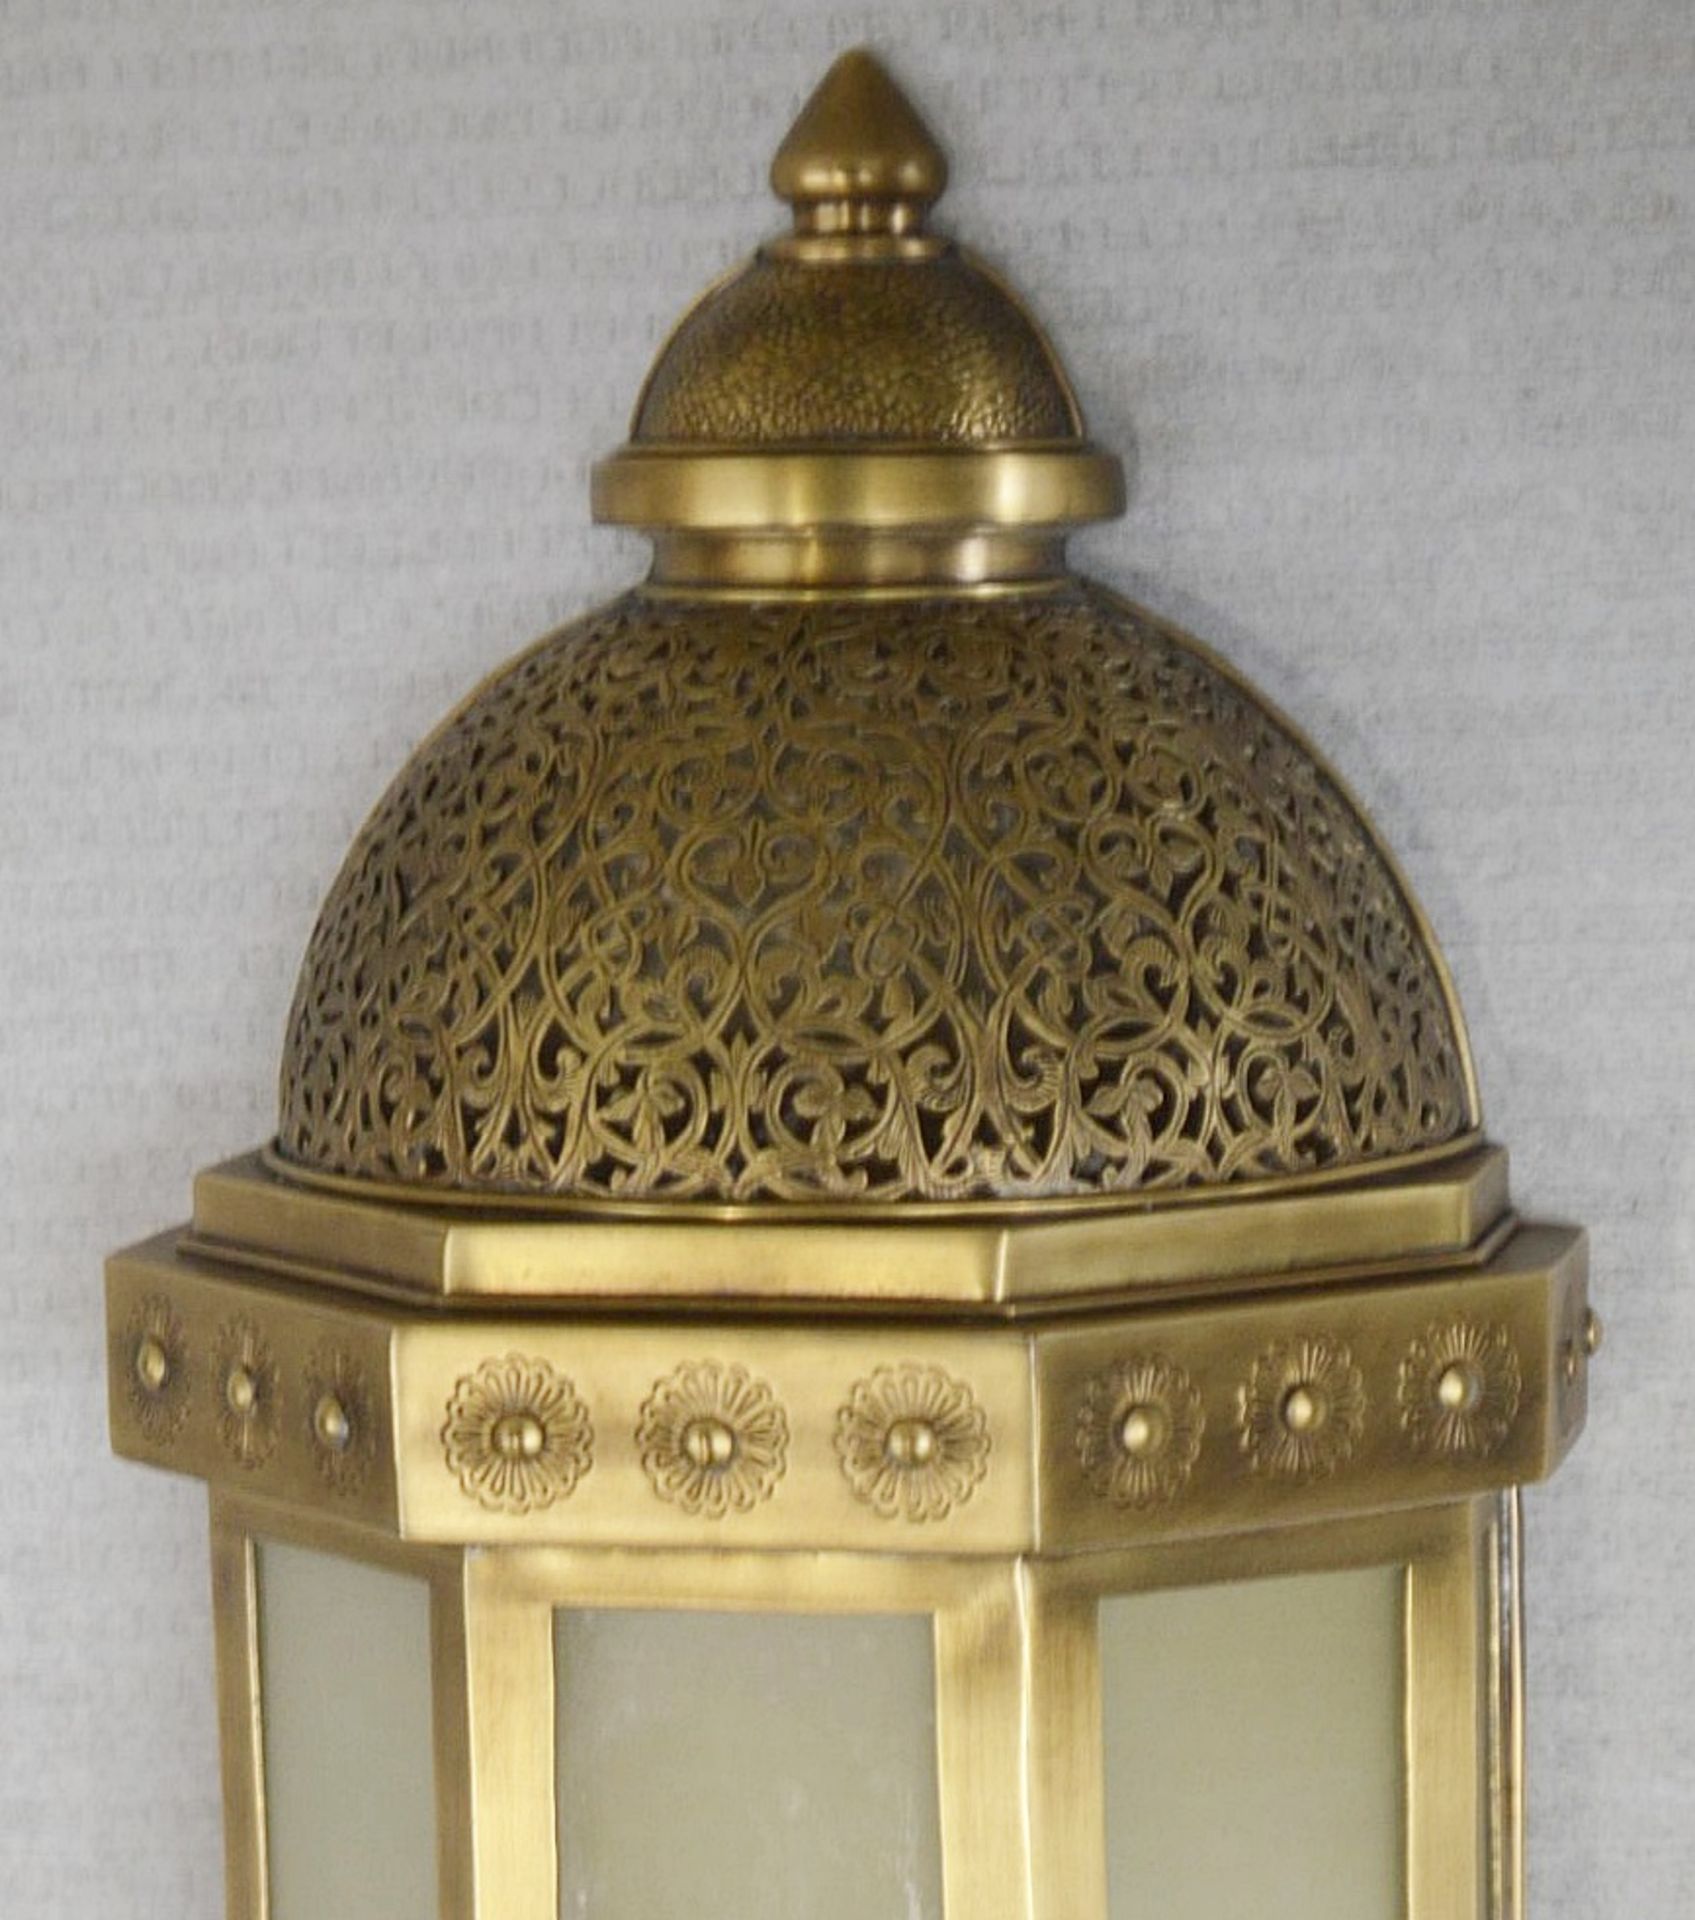 1 x Moroccan-style Brass Wall Light Featuring Intricate Filigree Detailing - Dimensions: Height 80cm - Image 3 of 6